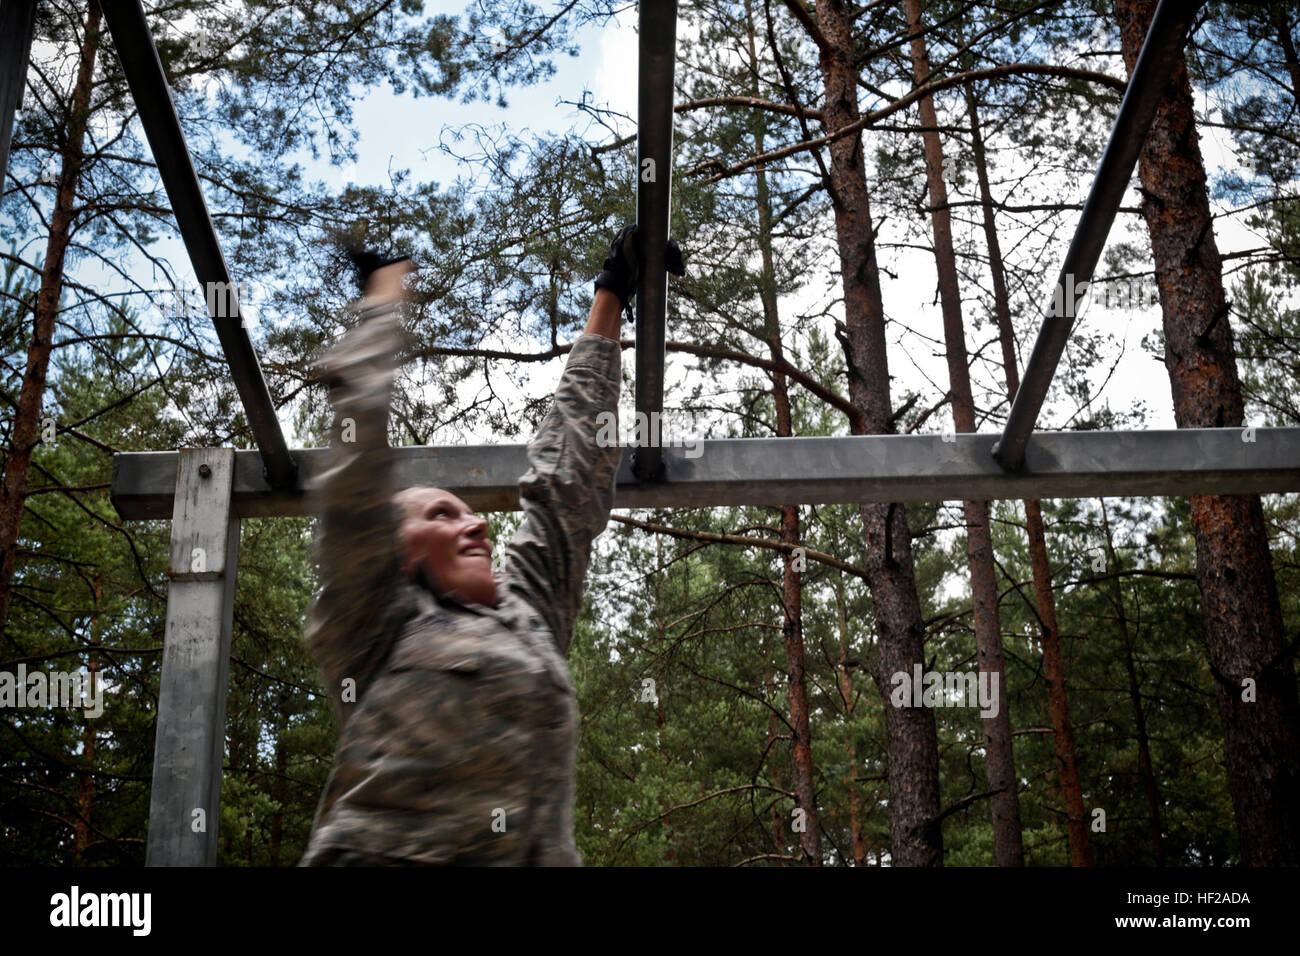 U.S. Air Force Staff Sgt. Alison Jones, with the 227th Air Support Operations Squadron, New Jersey Air National Guard (ANG), does the monkey bar challenge on an obstacle course at the Grafenwoehr Training Area in Bavaria, Germany, July 17, 2014, with Airmen with the 177th Fighter Wing, New Jersey ANG and the 124th Fighter Wing, Idaho ANG as part of joint training mission Operation Kriegshammer. (U.S. Air National Guard photo by Tech. Sgt. Matt Hecht/Released) Kriegshammer 140717-Z-NI803-479 Stock Photo